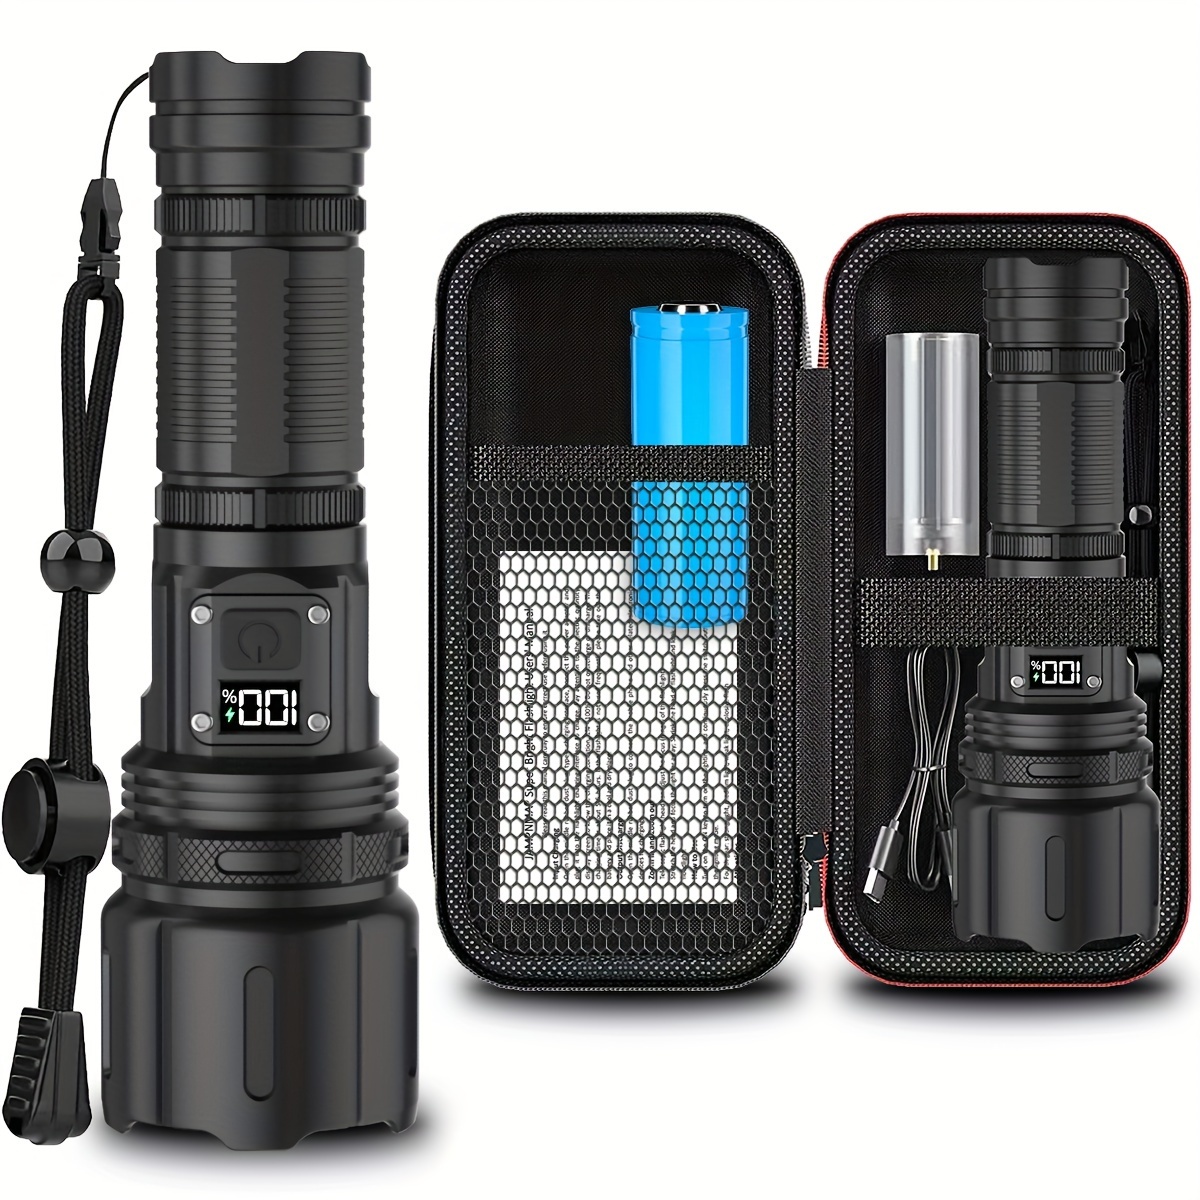 Laighter Flashlight, 120000 High Lumens Rechargeable Flashlights